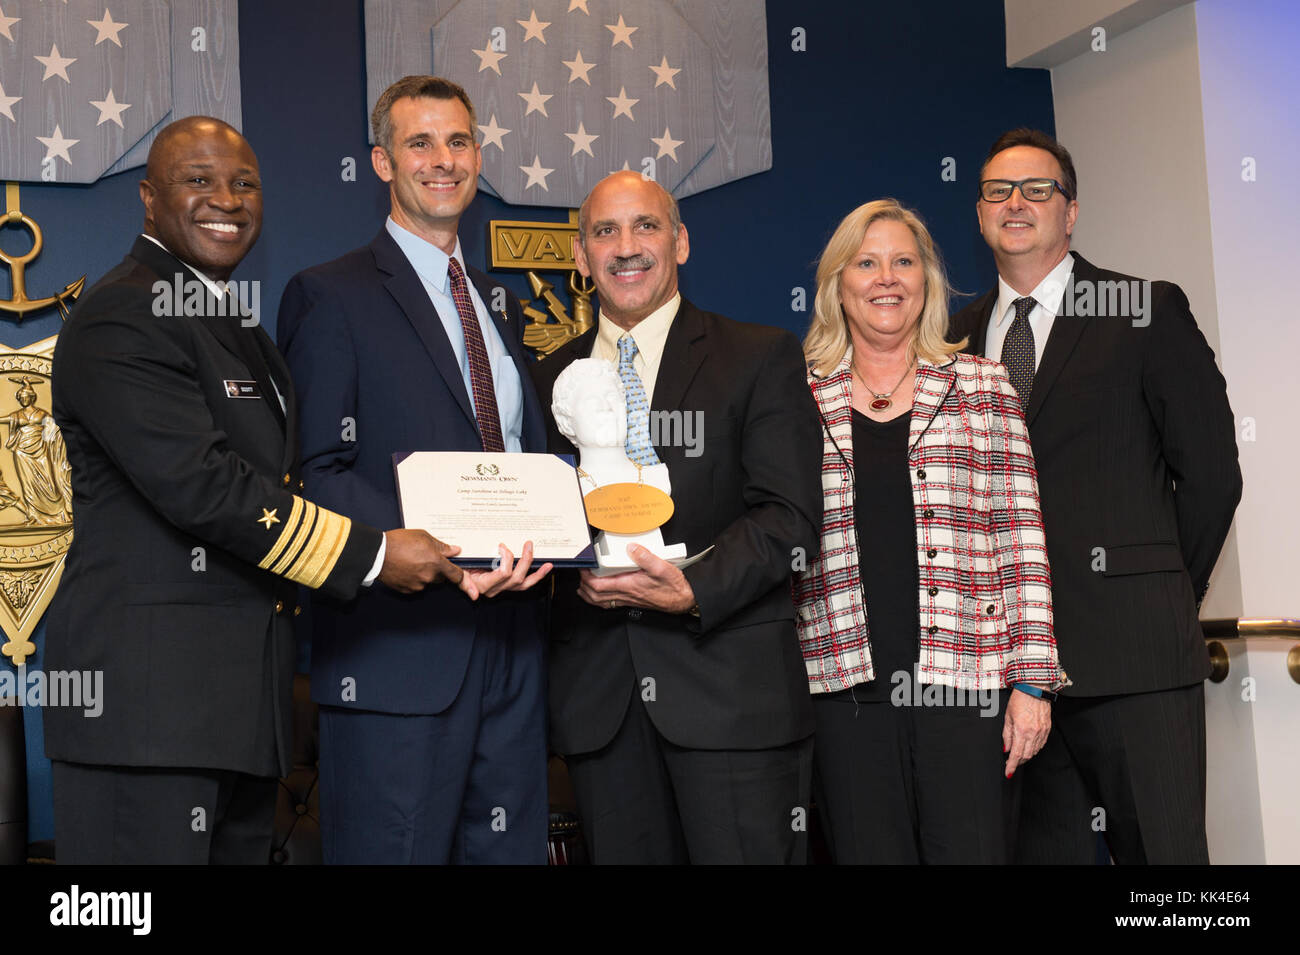 Michael Katz, Camp Sunshine Executive Director, accepts the highest honor and a $50,000 award during the 2017 NewmanÕs Own Awards at the Hall of Heroes in the Pentagon, Oct. 11, 2017. Camp Sunshine provides retreats combining respite, recreation and support for children with life-threatening illnesses and their families through the various stages of a childÕs illness. The annual competition seeks to reward ingenuity for programs that benefit service men, women, and their families. To date, the competition has recognized 174 programs with awards totally $1, 725,000. (DoD Photo by U.S. Army Sgt. Stock Photo